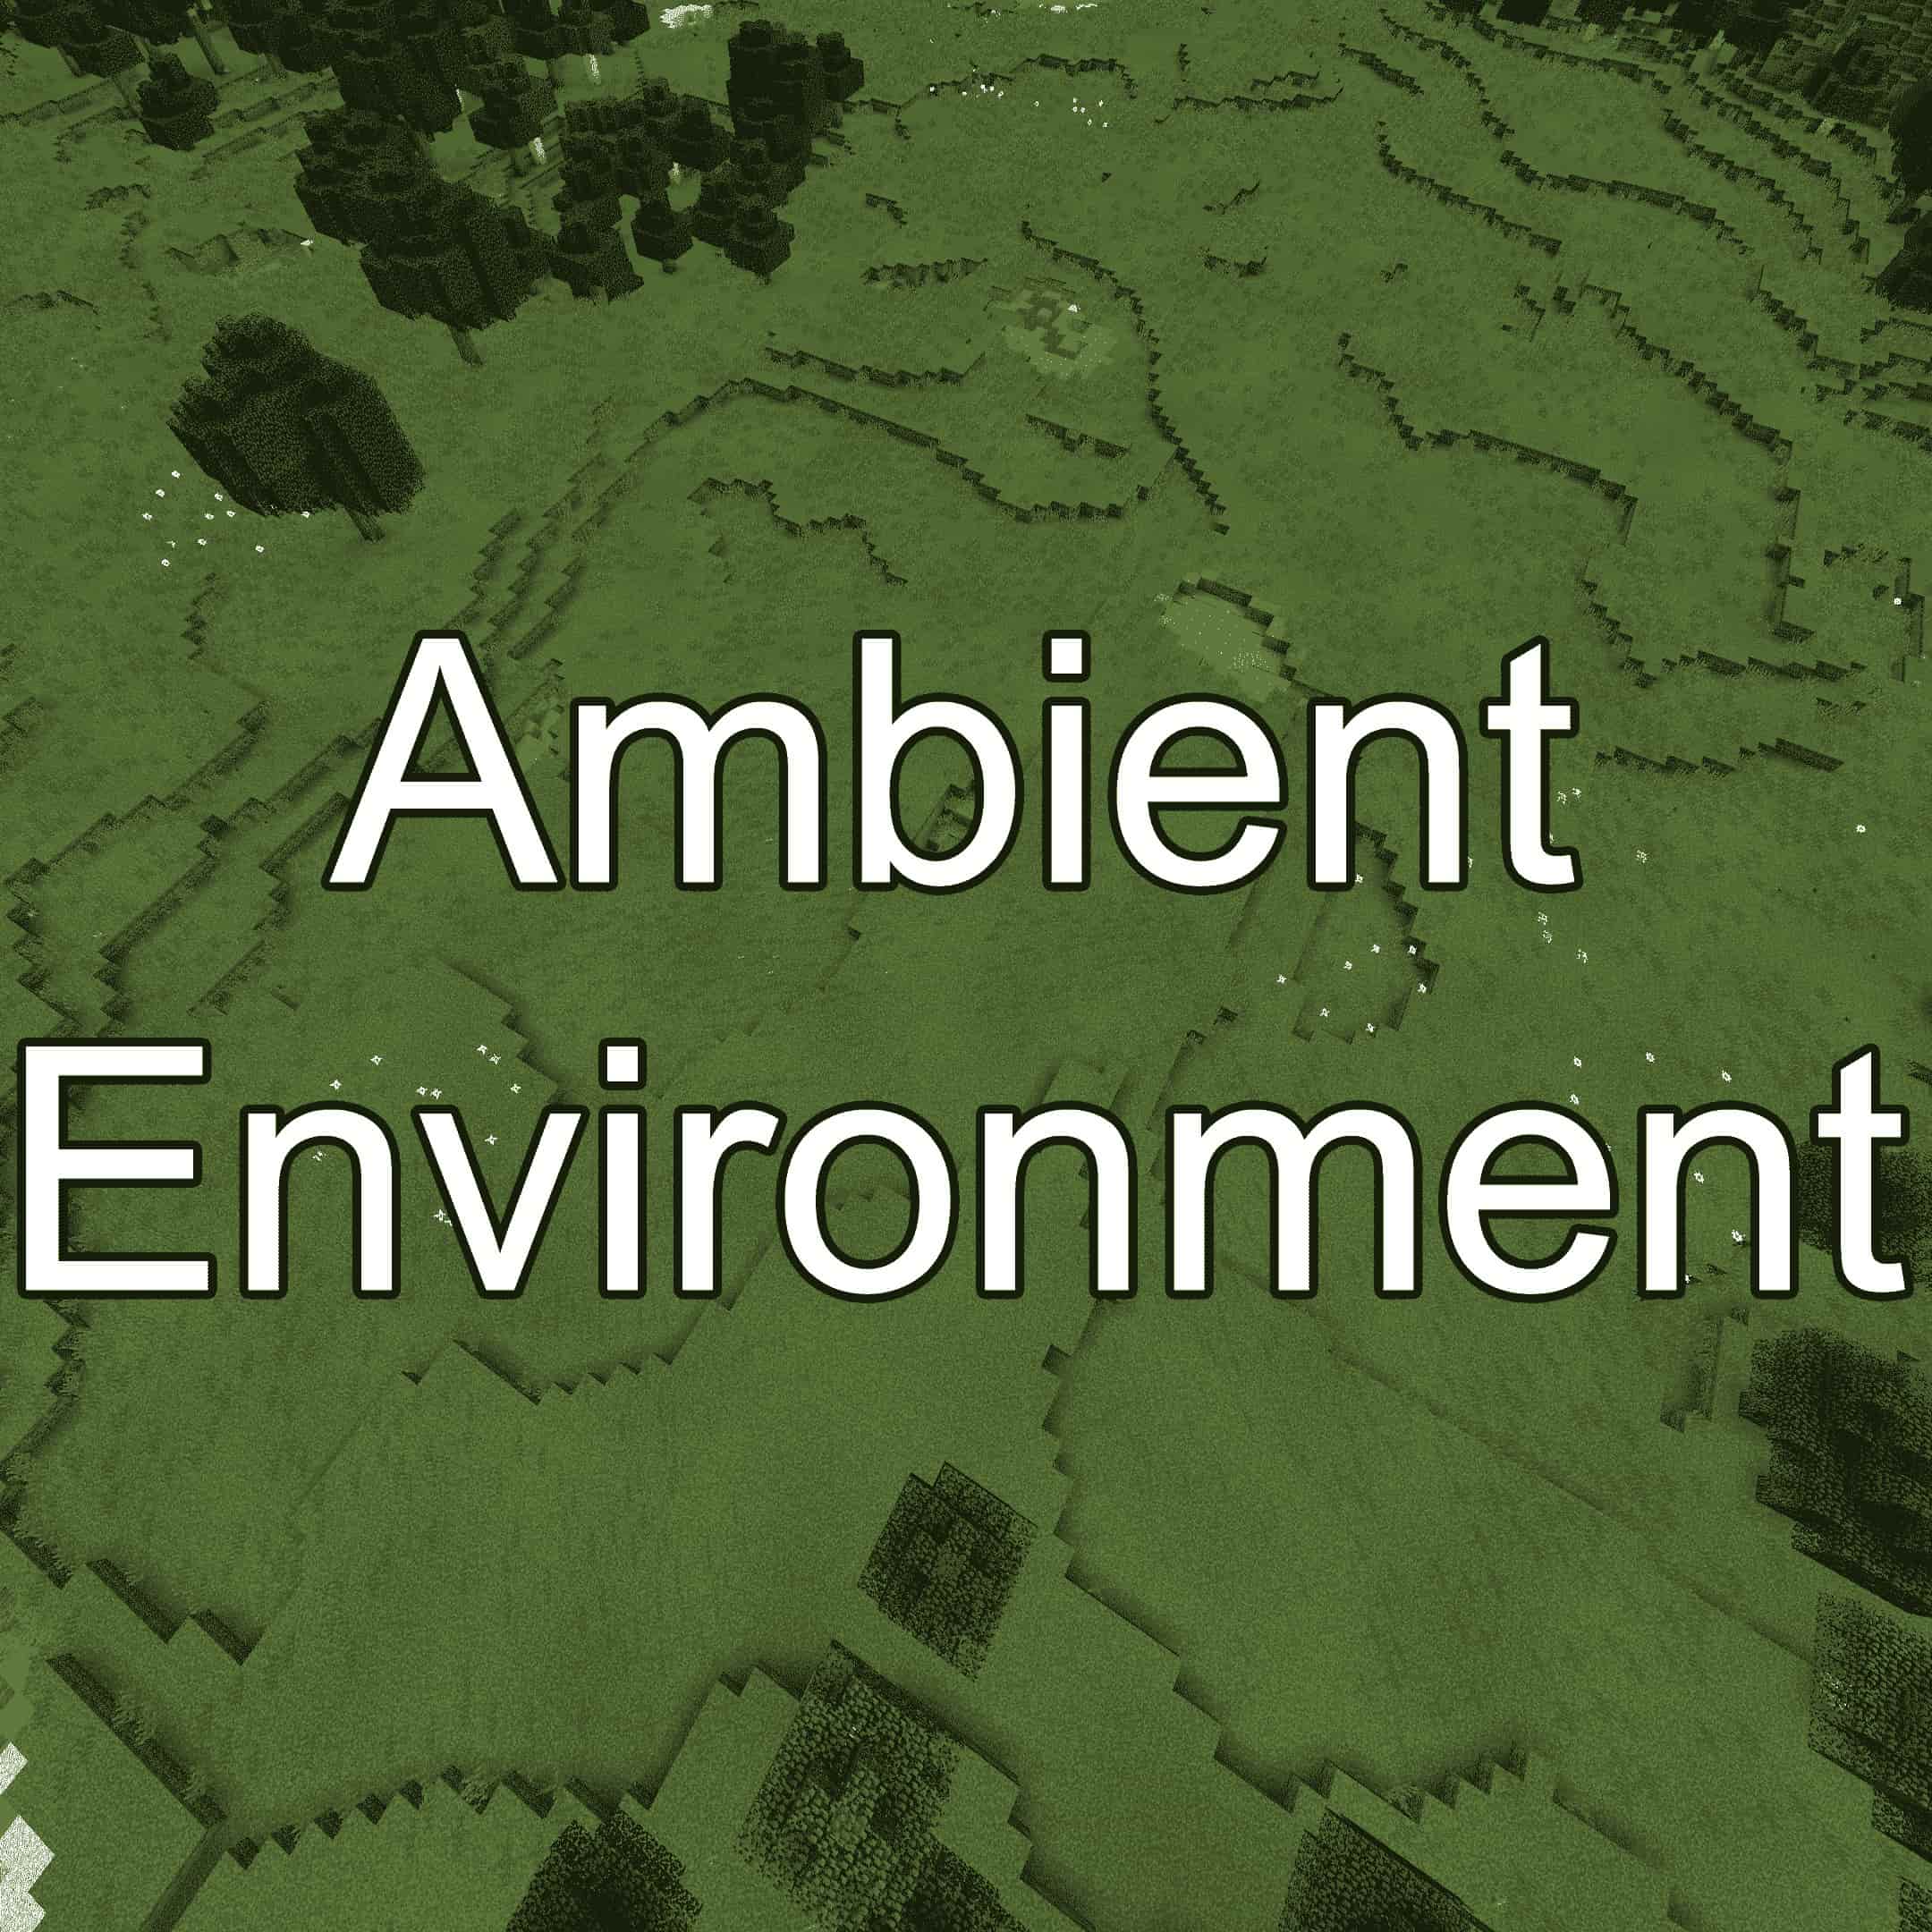 Ambient Environment